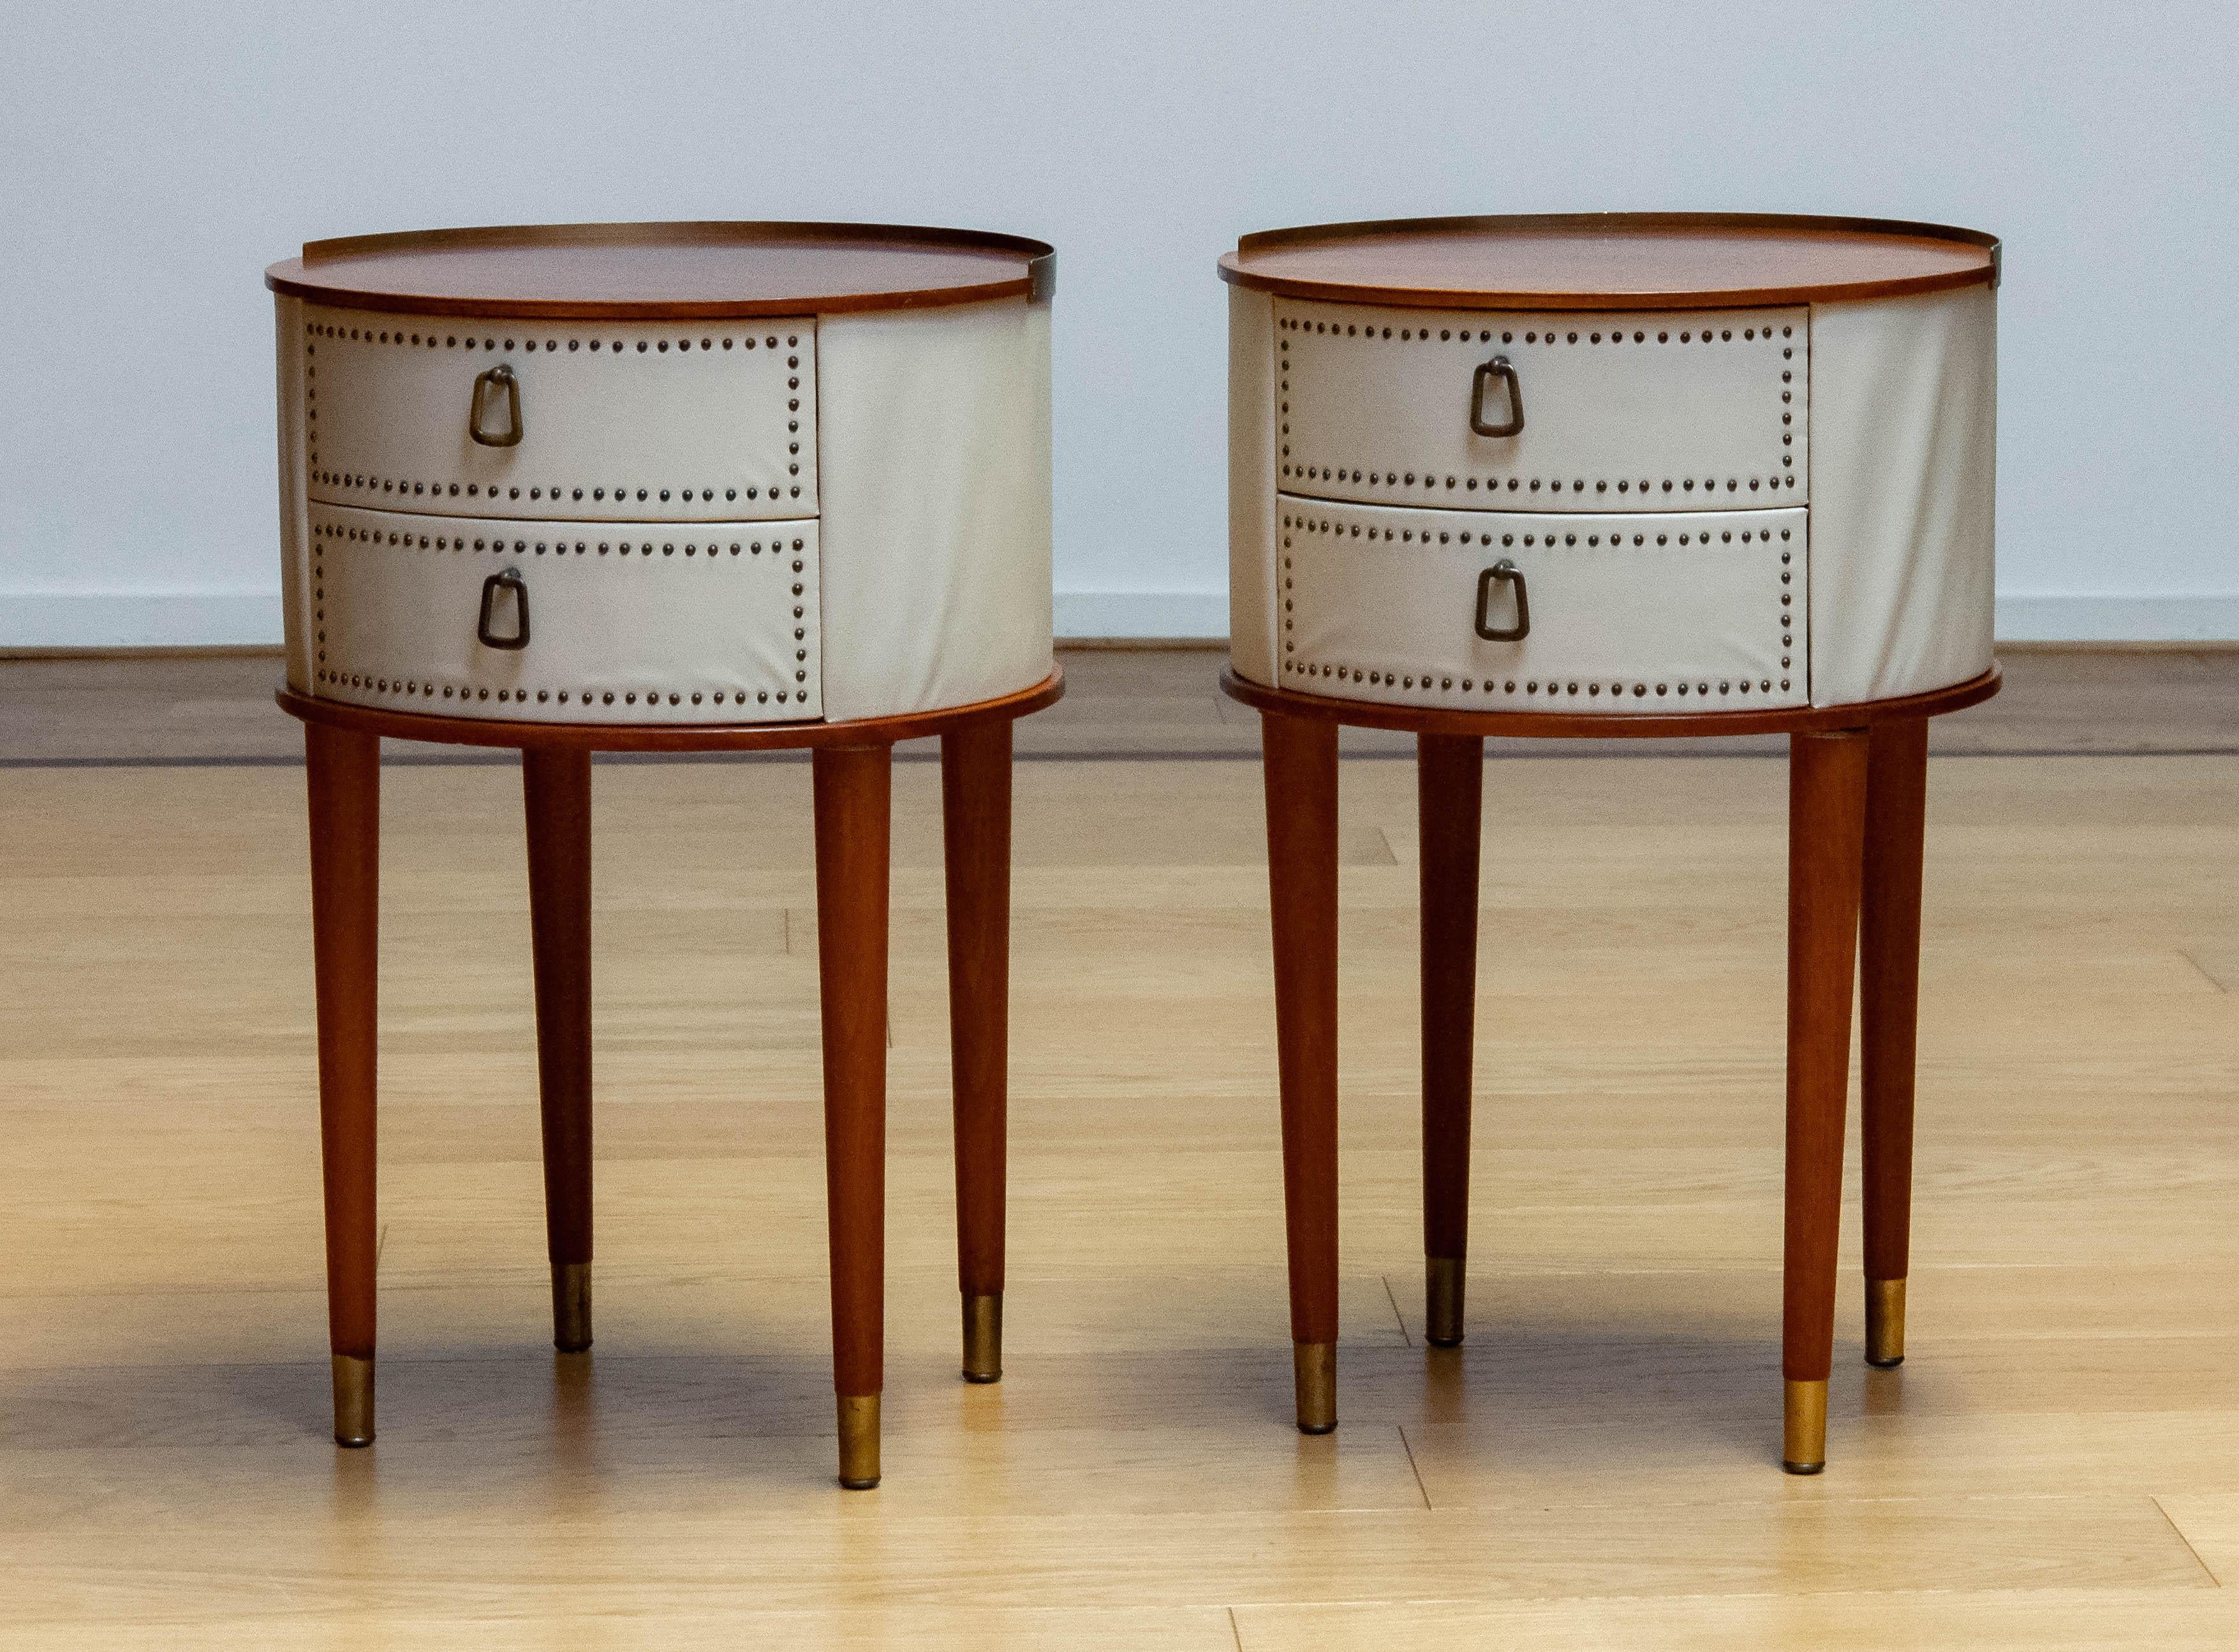 Beautiful matching pair night stands / bedside tables designed by Halvdan Pettersson for Tibro in Sweden from the 1950s.
Both nightstands / bedside tables have two drawers nailed and brass hangings.
The nightstand ar both in good condition.

Please